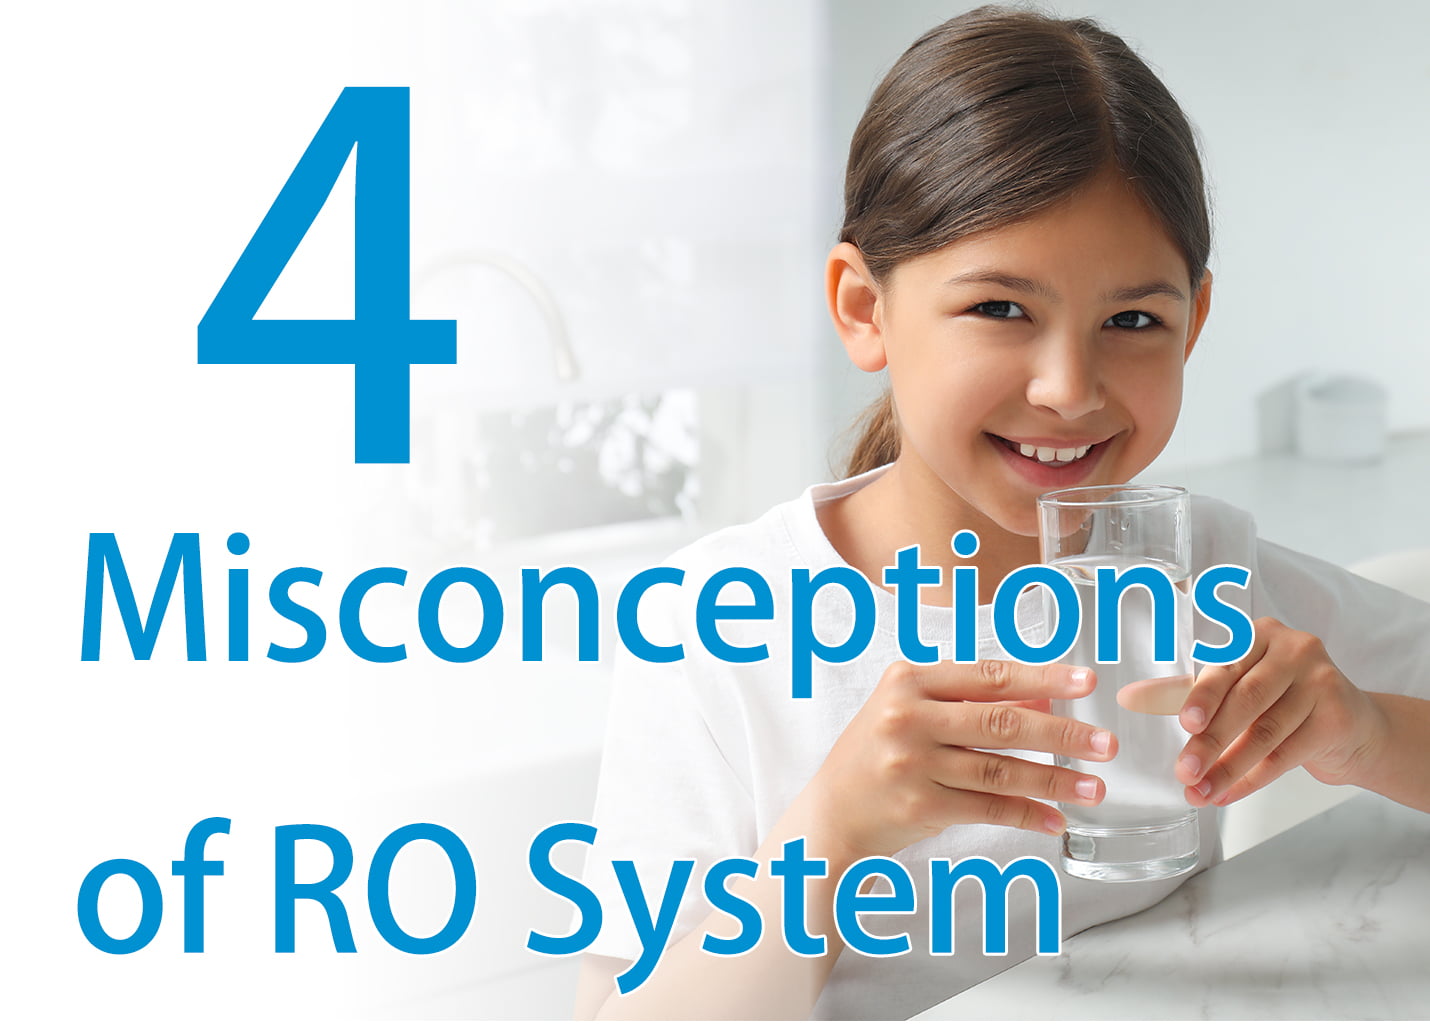 Misconceptions of RO System